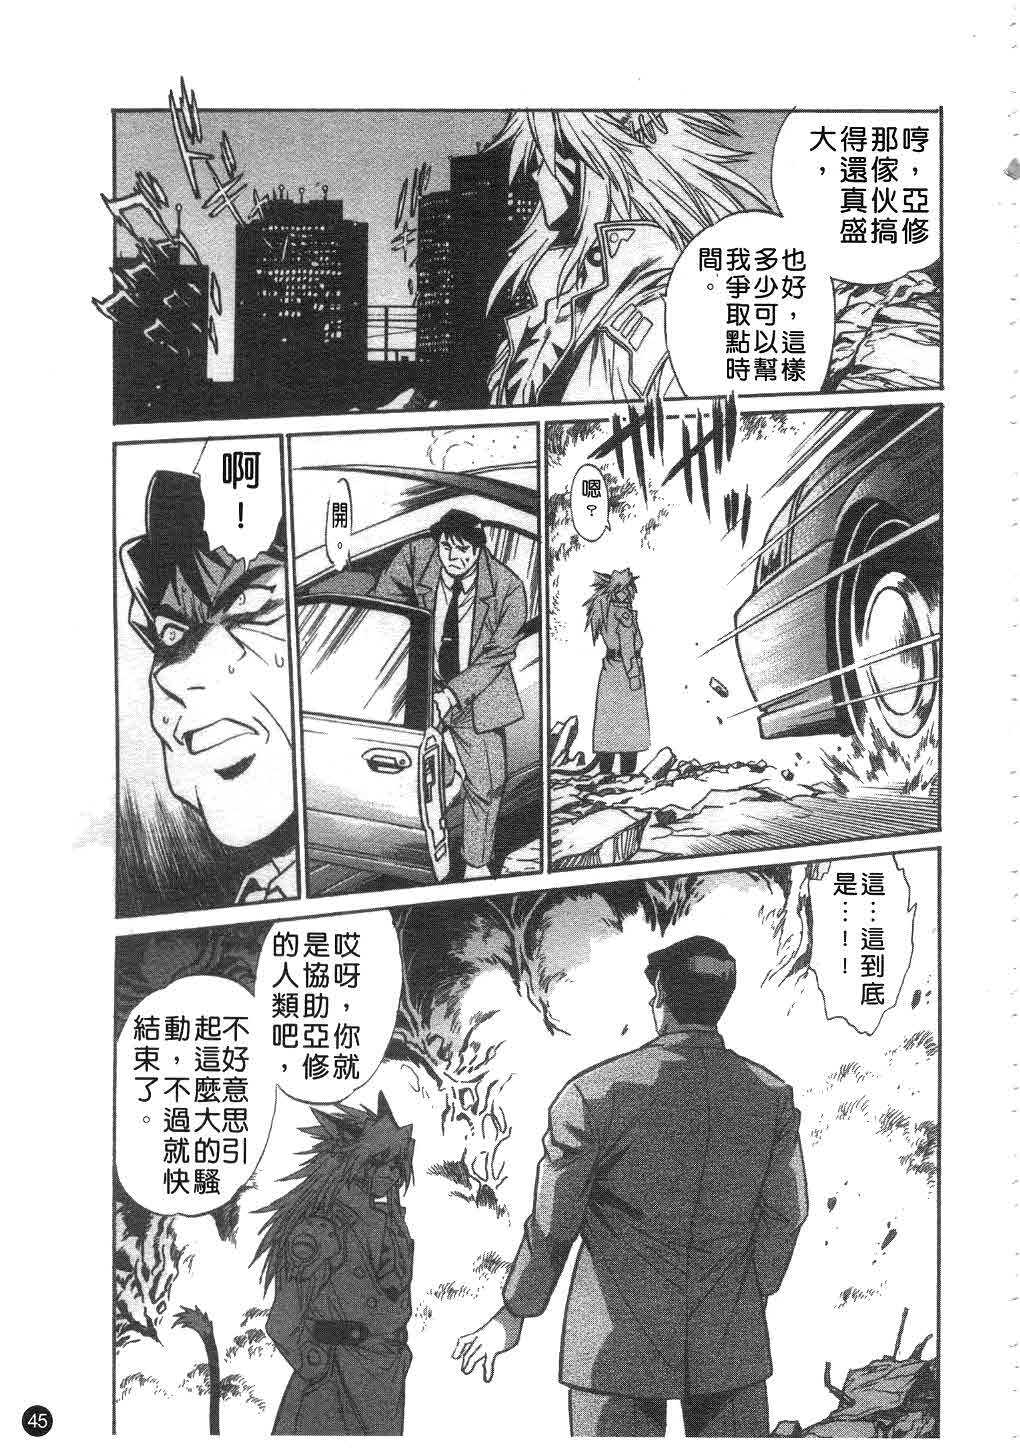 [Manabe Jouji] Tail Chaser 2 | 貓女迷情 2 [Chinese] page 46 full